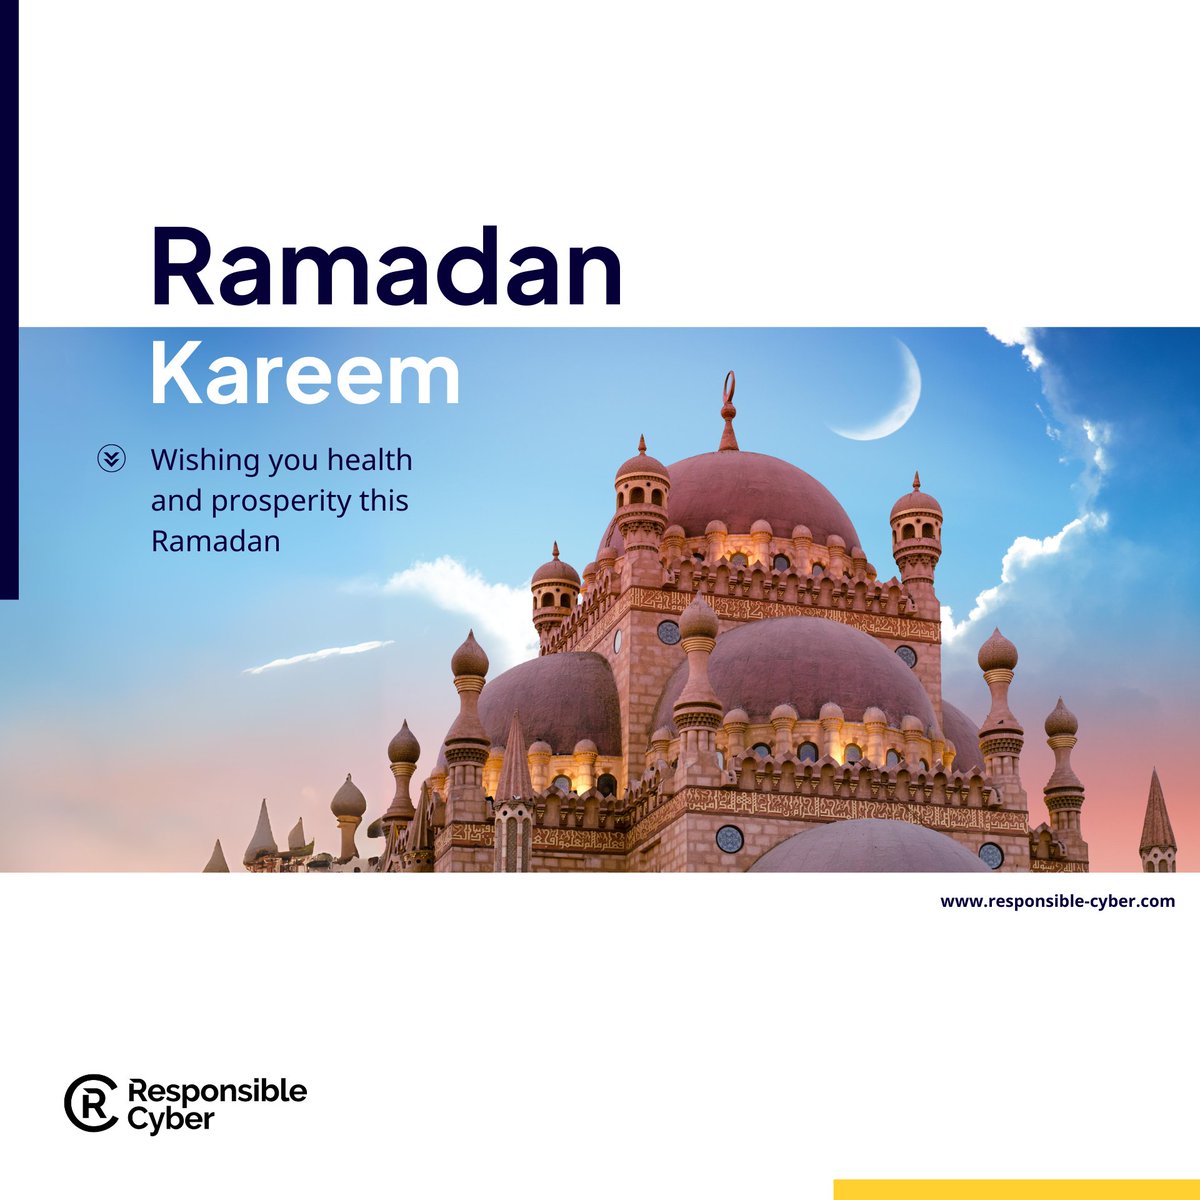 As our Muslim friends and colleagues enter into a meaningful month of fasting, we send our wishes of a joyous and fulfilling Ramadan to you and your families.

May this month inspire us all towards greater understanding and kindness.

#RamadanKareem #ResponsibleCyber